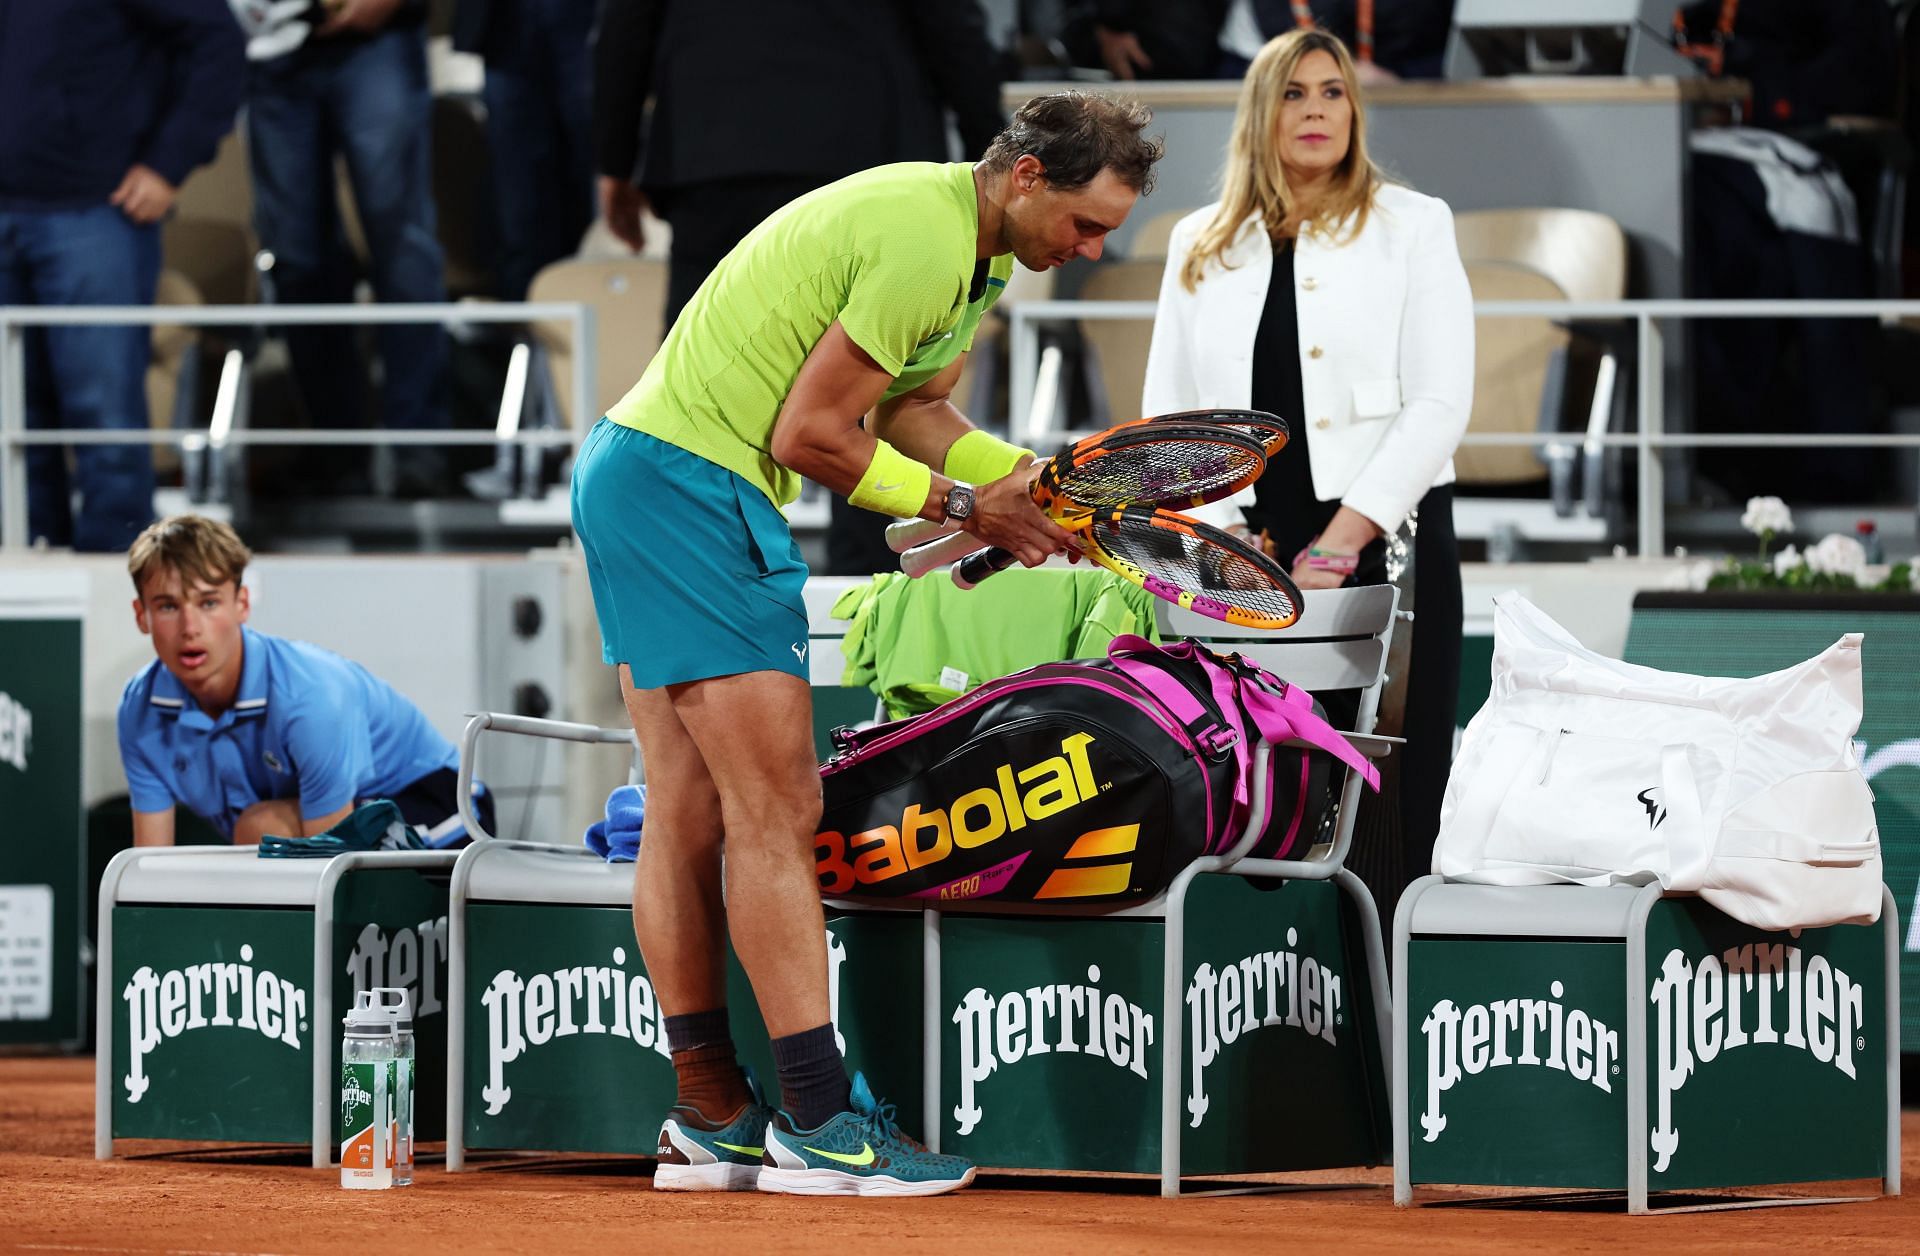 Night sessions have been introduced for the very first time at the French Open this year